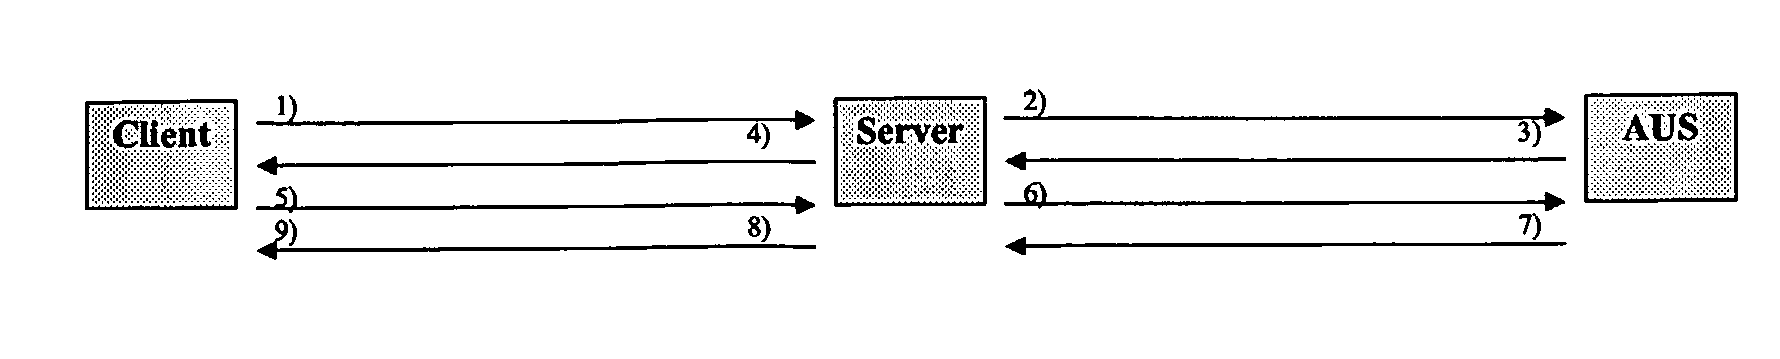 User Authentication and Authorisation in a Communications System